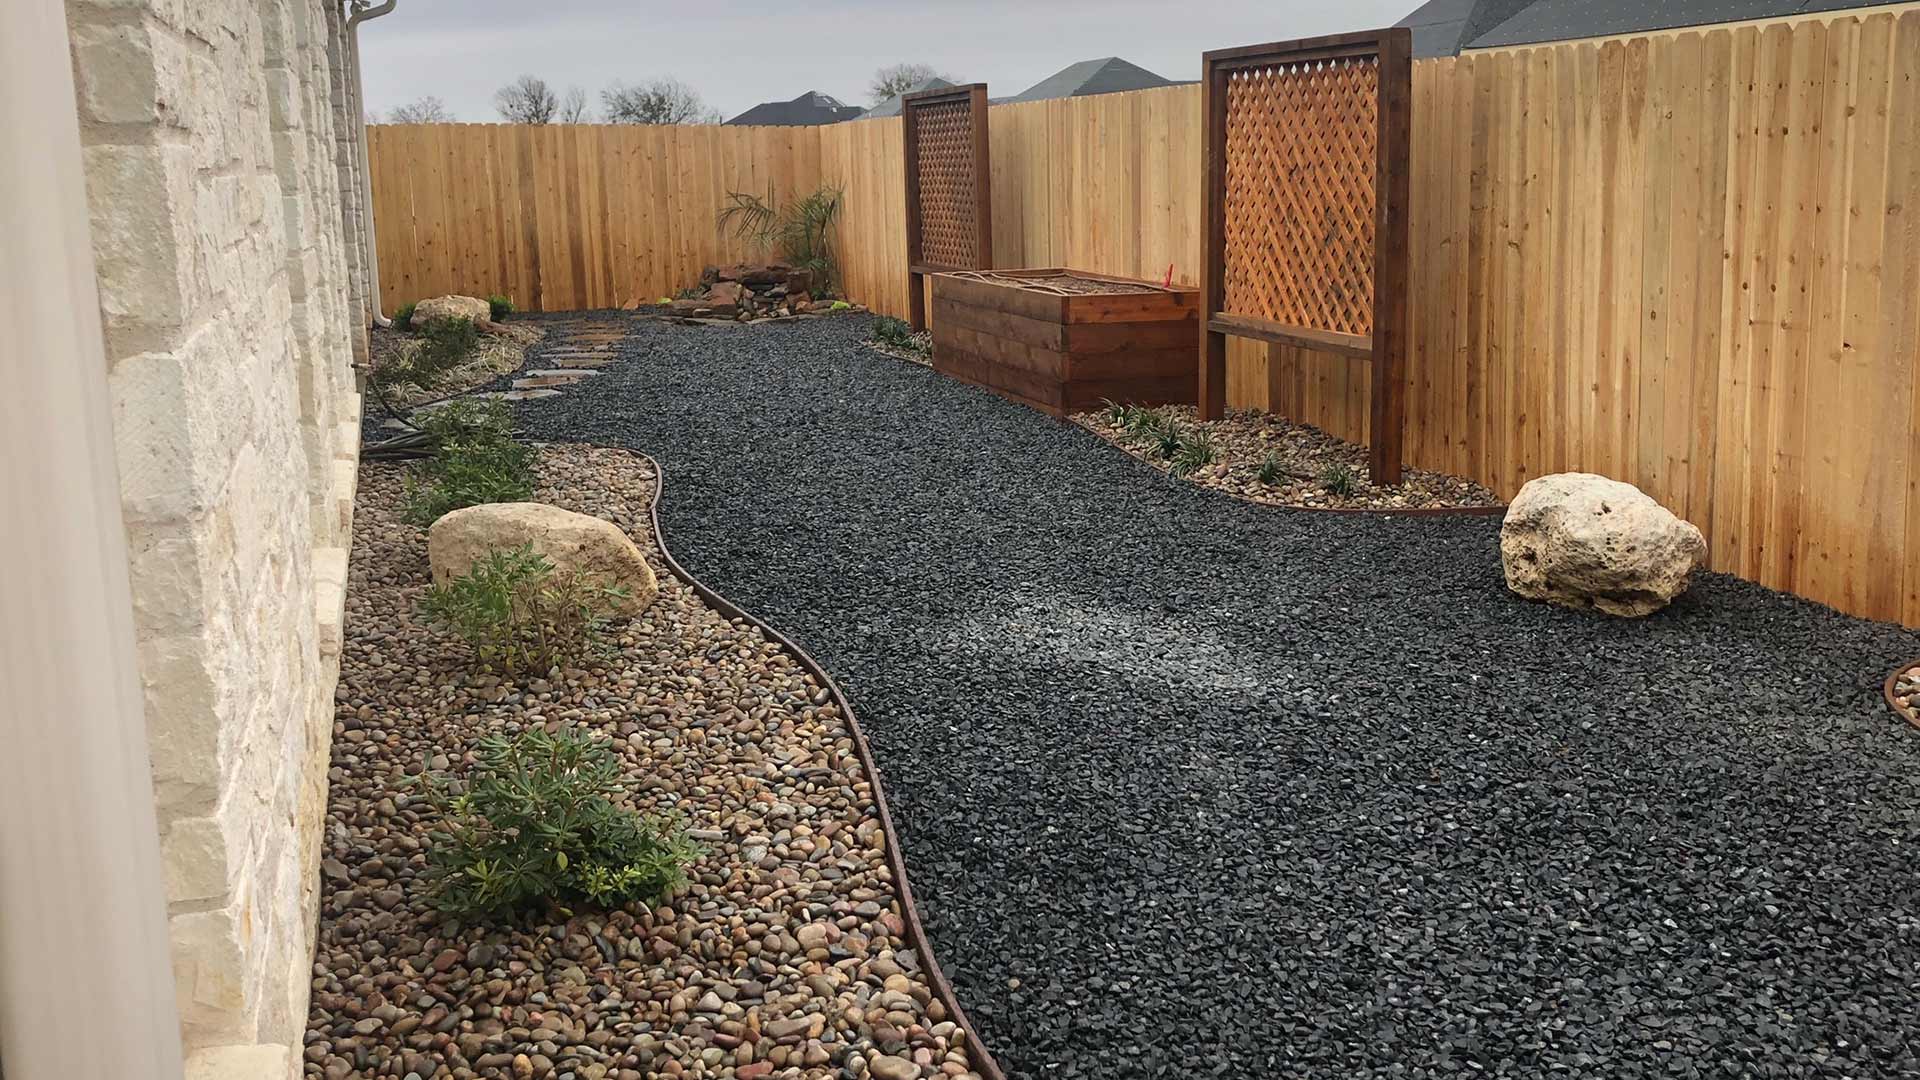 Landscaping with rock mulch and wooden fence around a home in China Spring, TX.